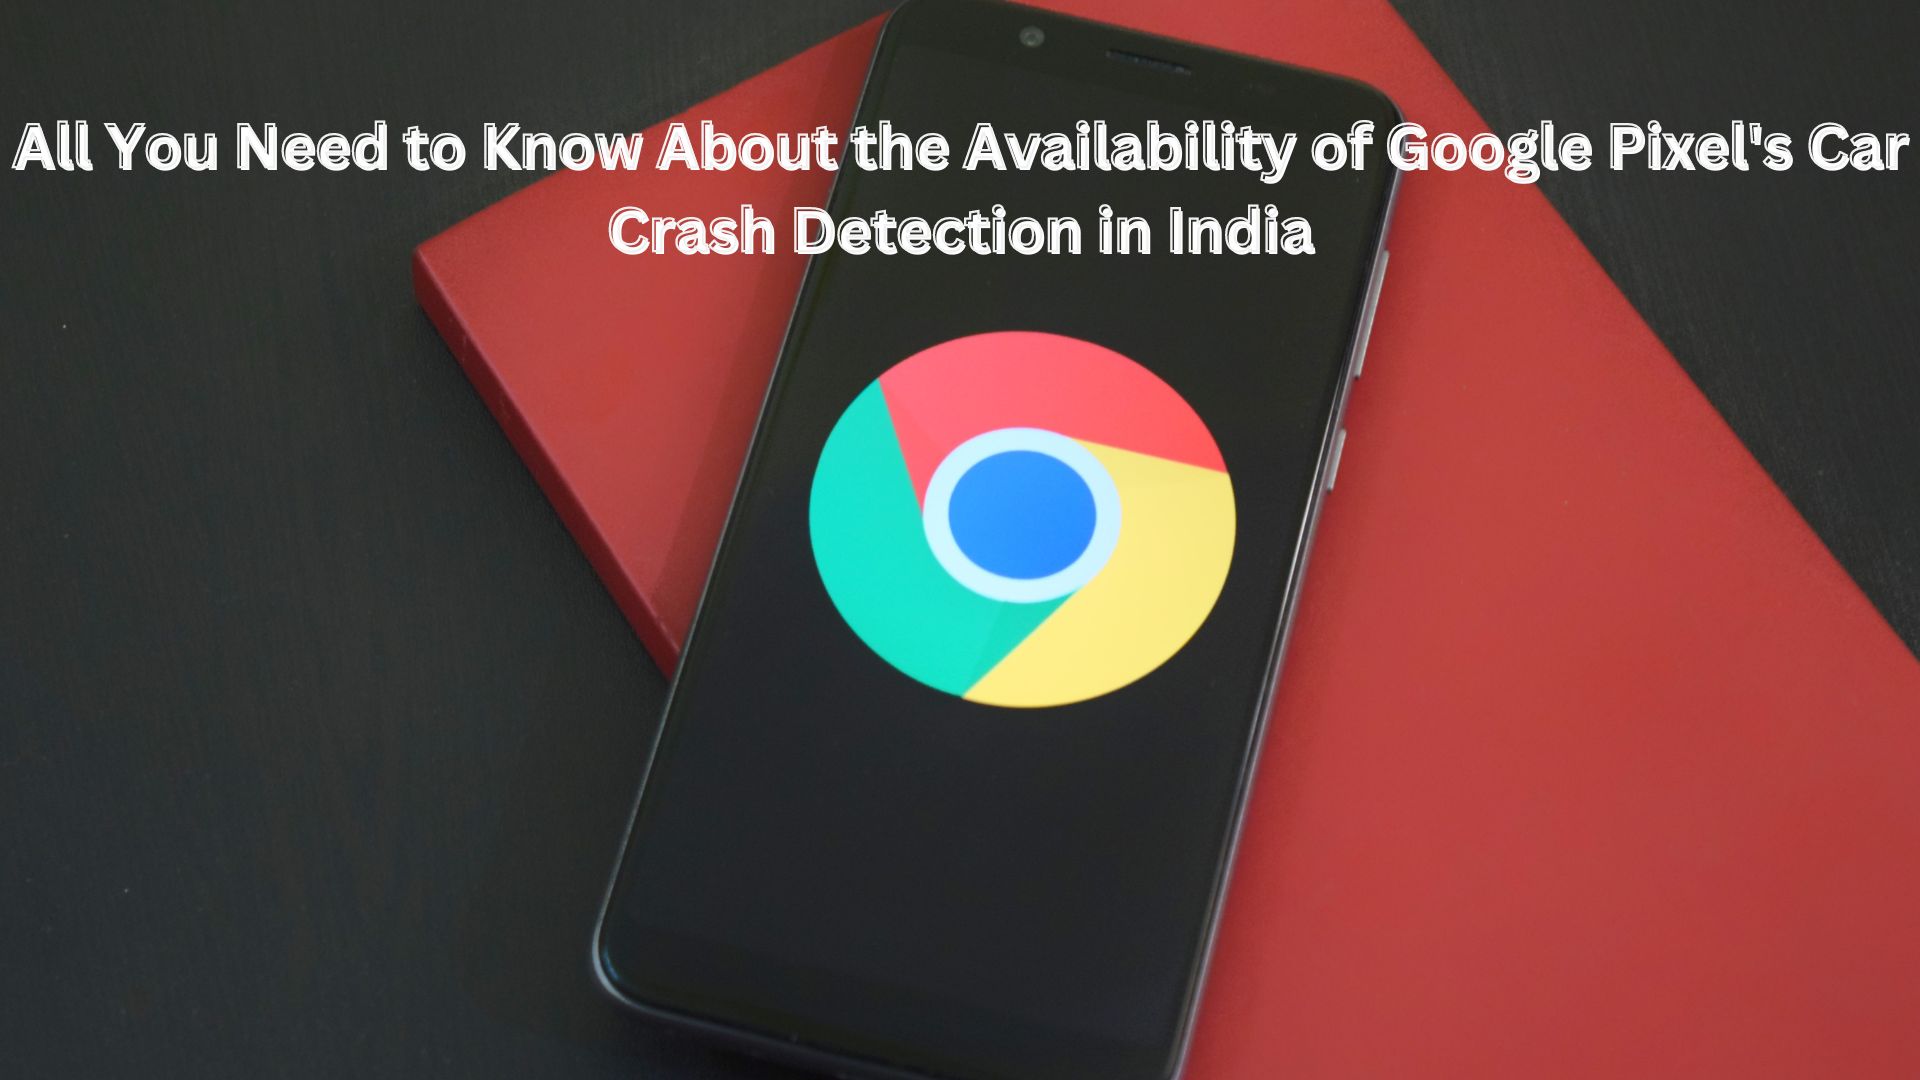 All You Need to Know About the Availability of Google Pixel's Car Crash Detection in India